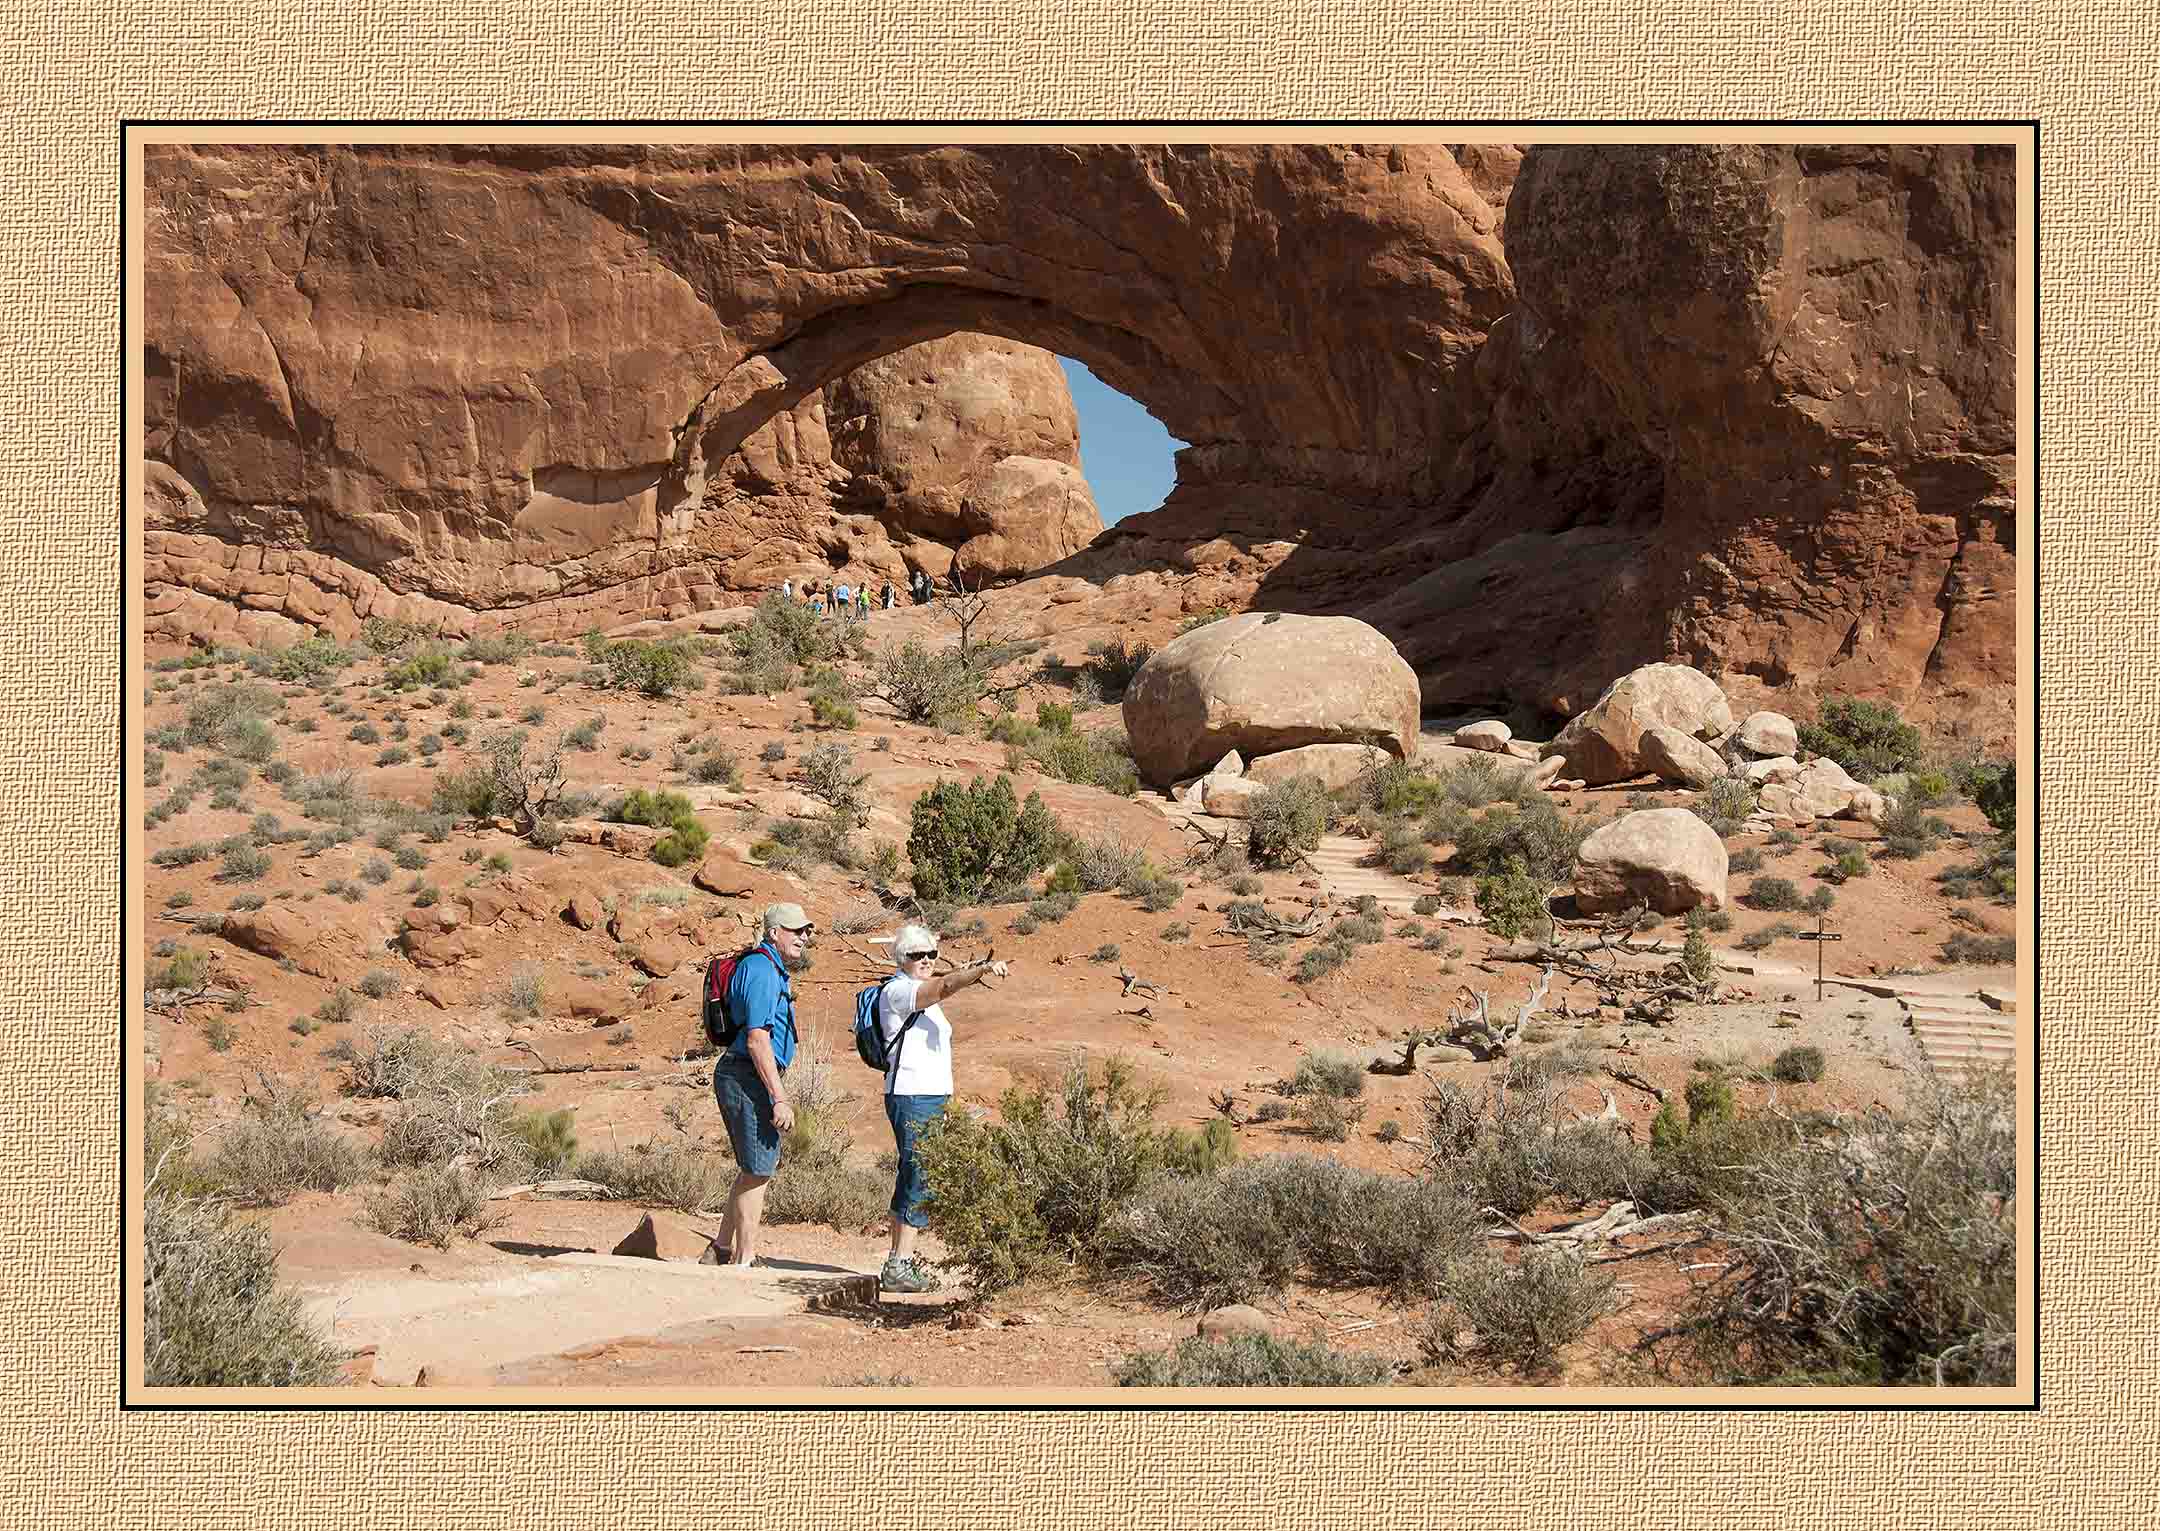 056 14 10 26 Arches NP